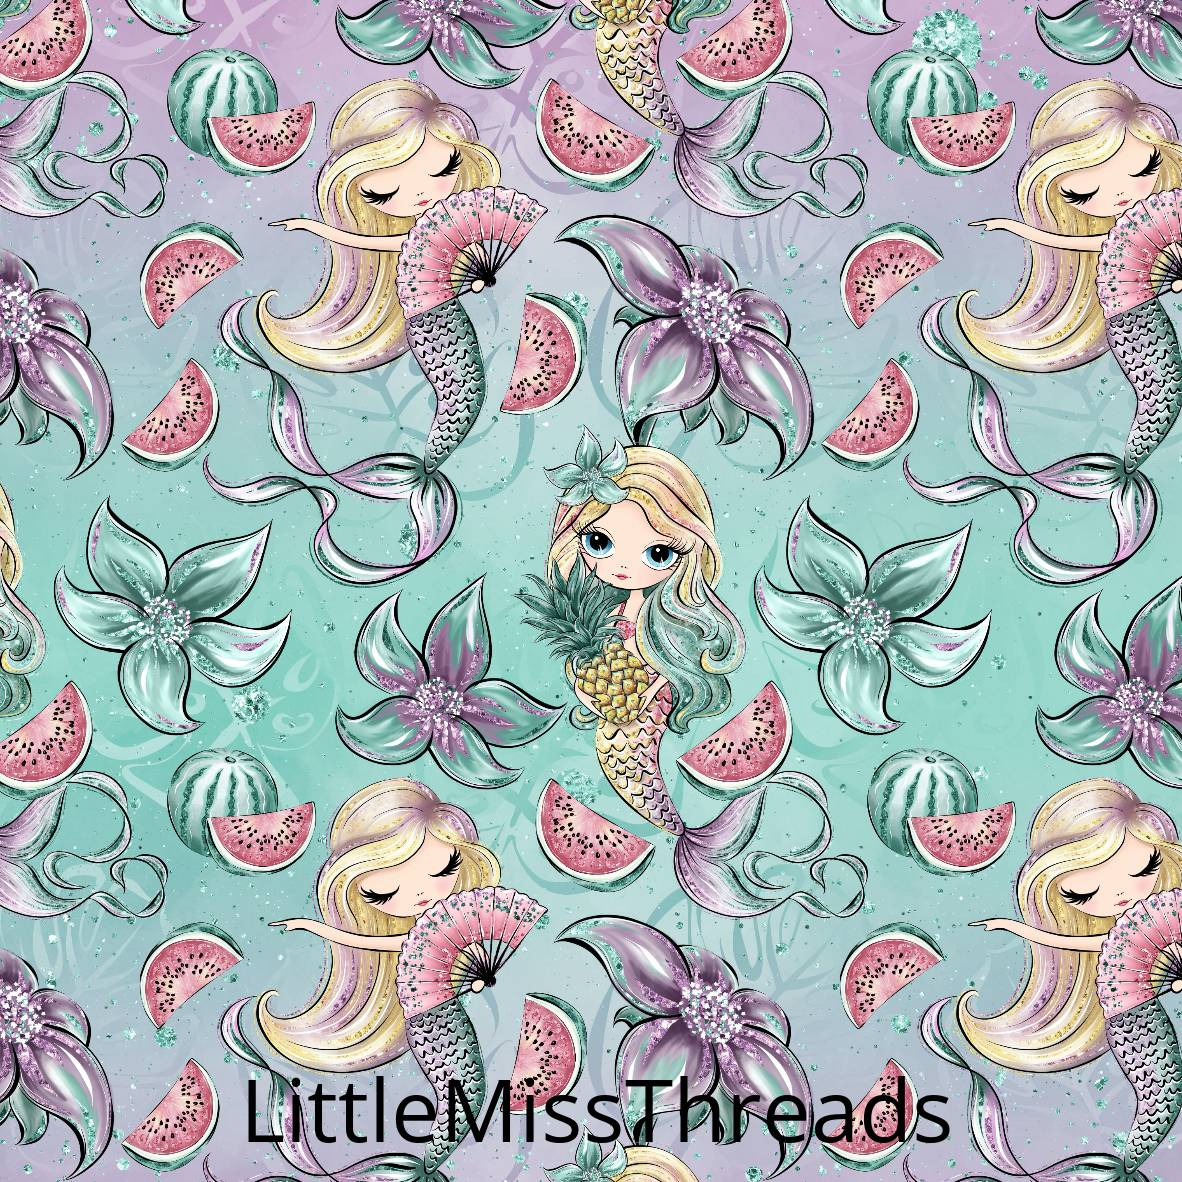 PRE ORDER - Phantasia Blue Mermaids - Fabric - Fabric from [store] by Little Miss Threads - 